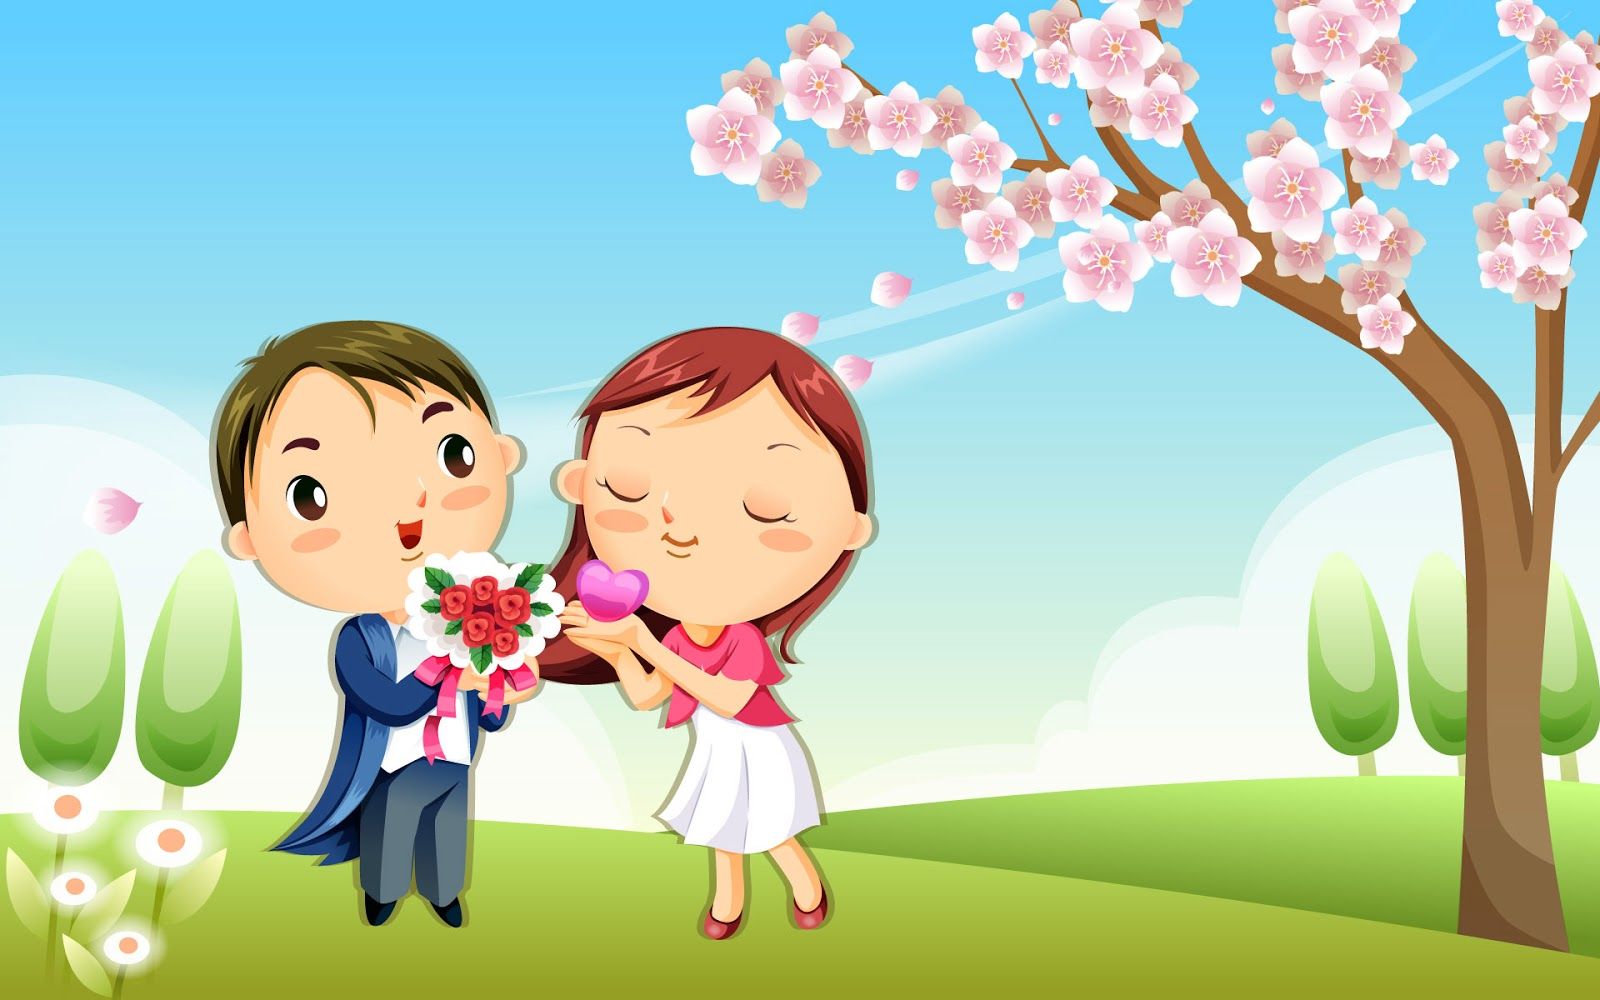 Happy Propose Day Images 2019 - HD Wallpaper 